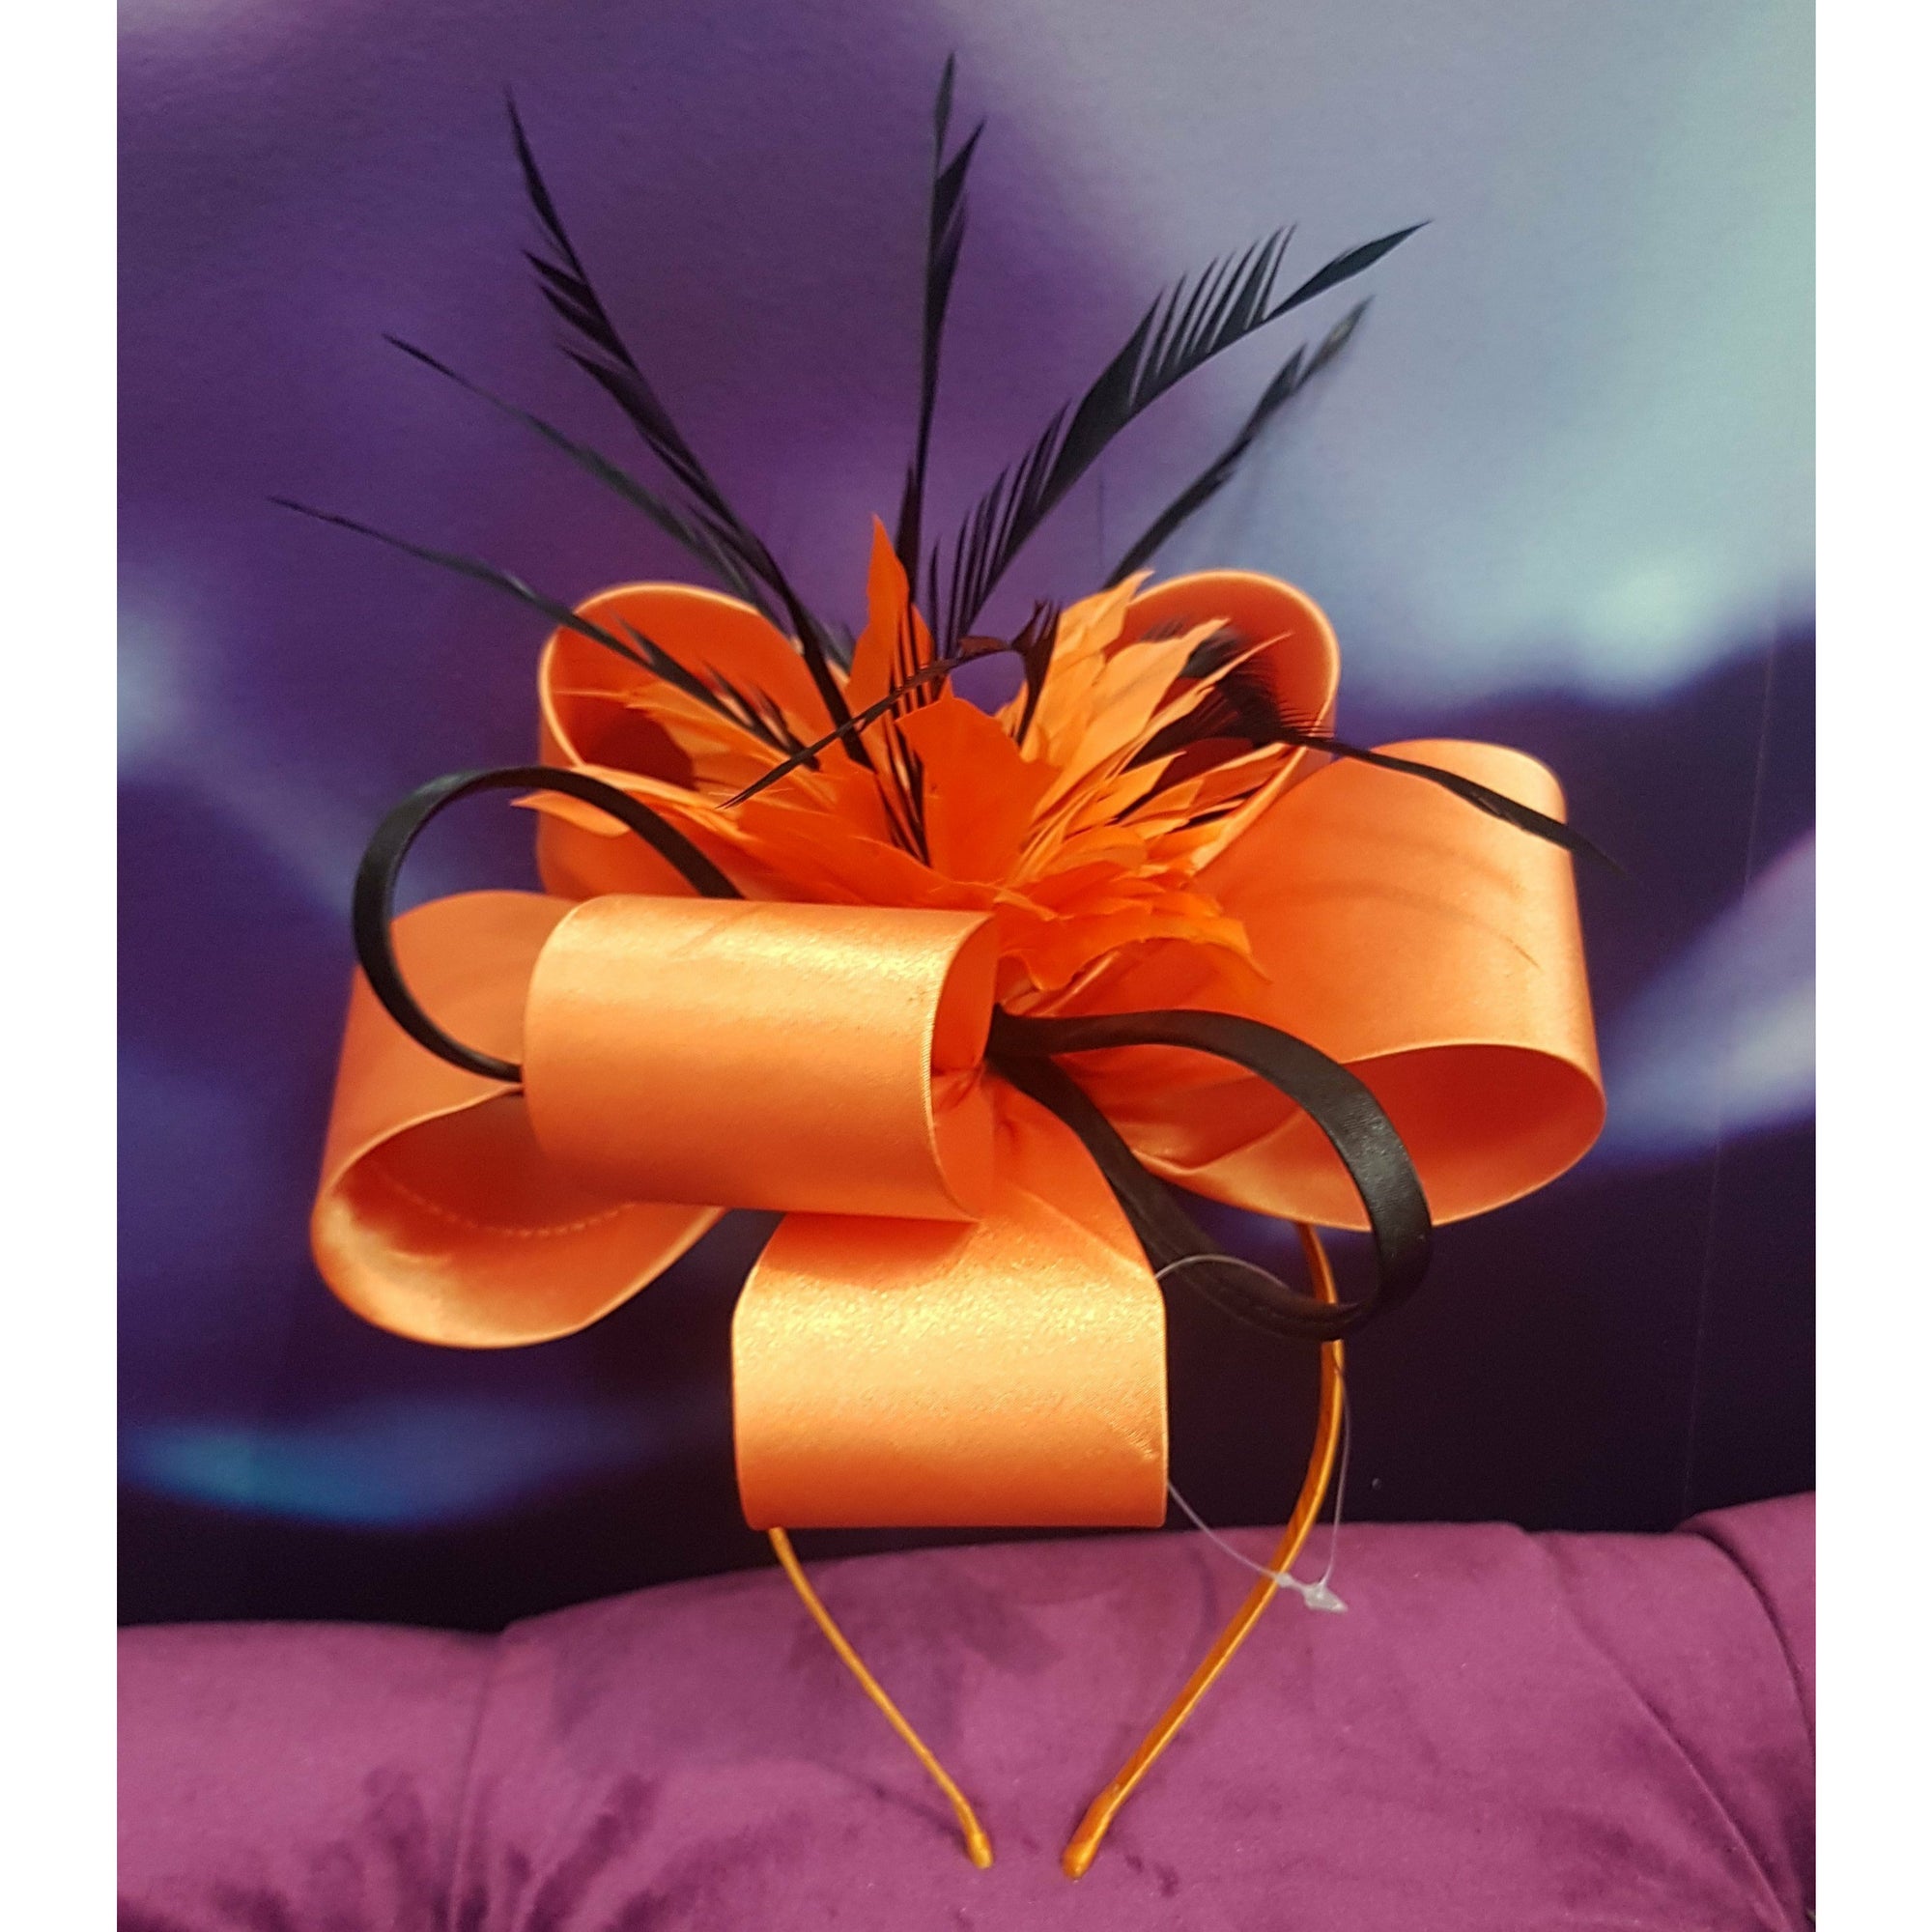 FASCINATOR - Orange Bow with Feathers Not specified